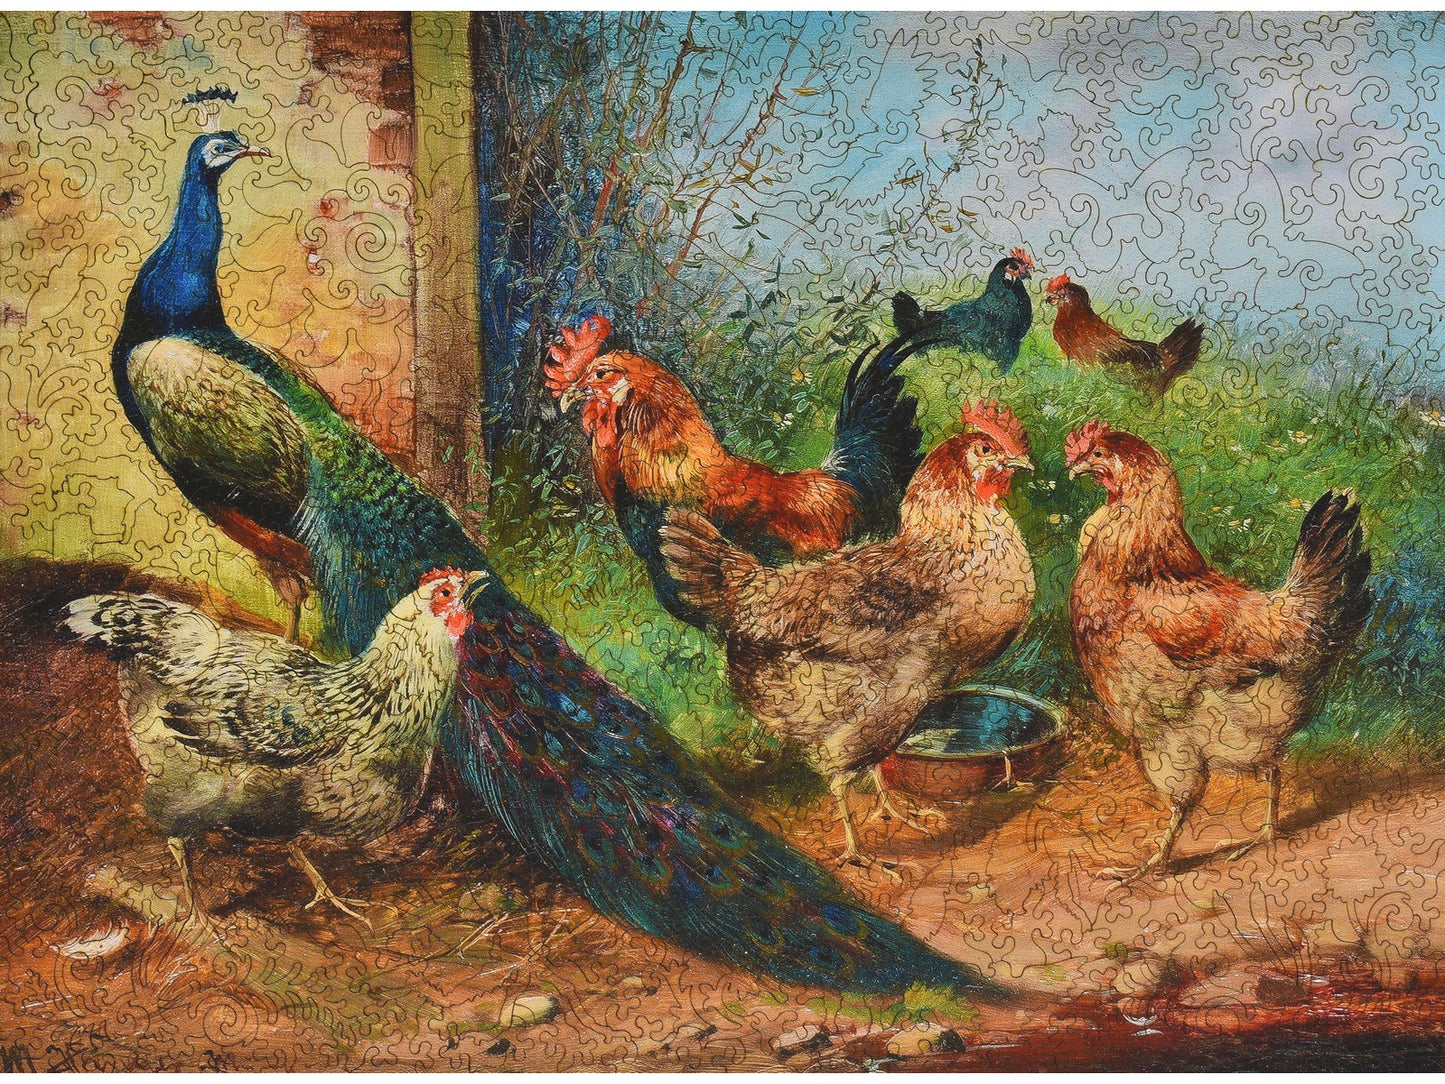 The front of the puzzle, Hens and Peacock.